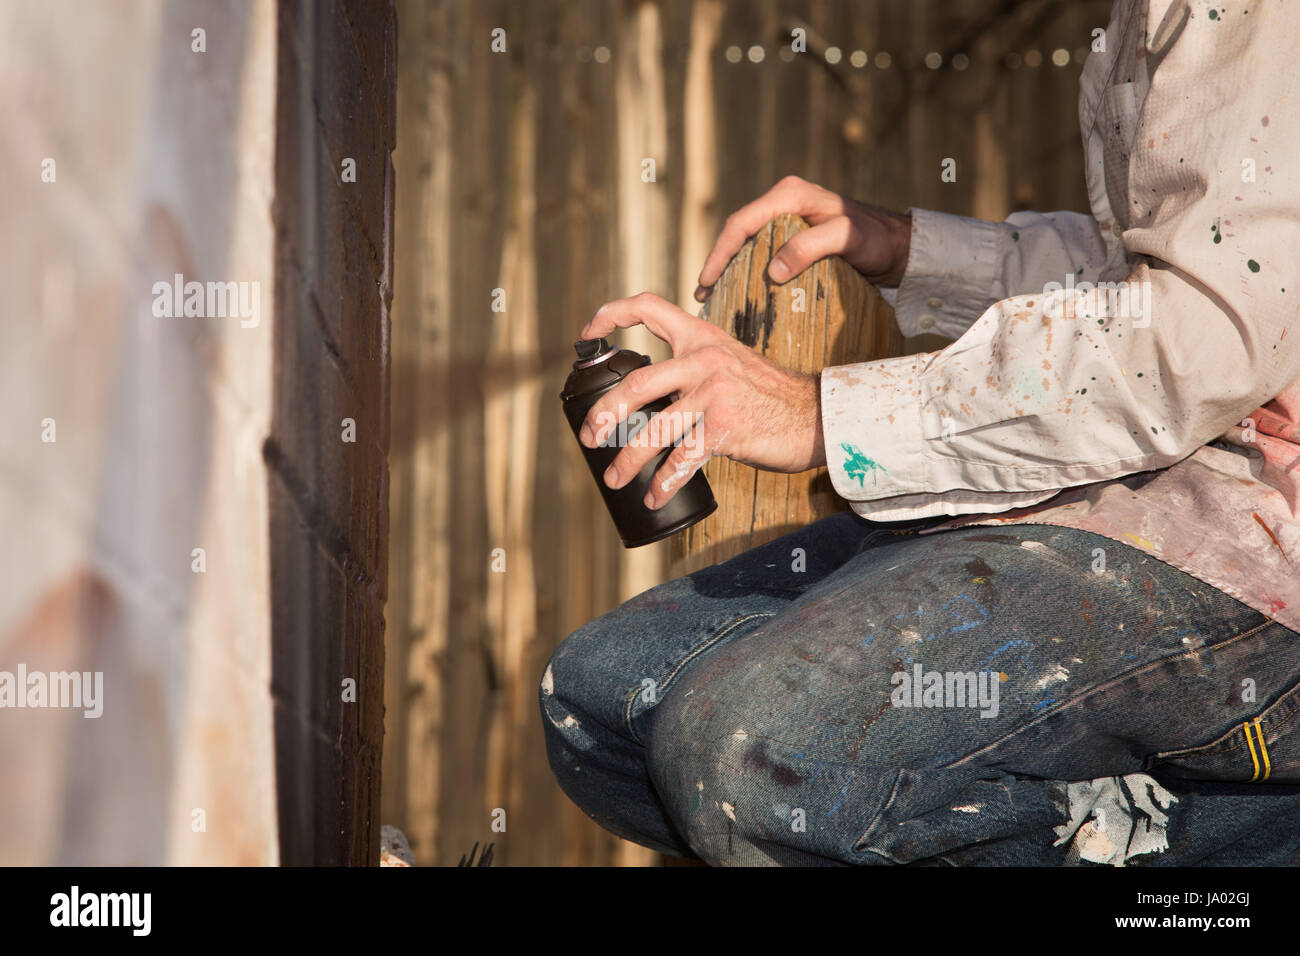 art, adult, adults, aerosol, artist, painter, alone, lonely, arms, building, Stock Photo